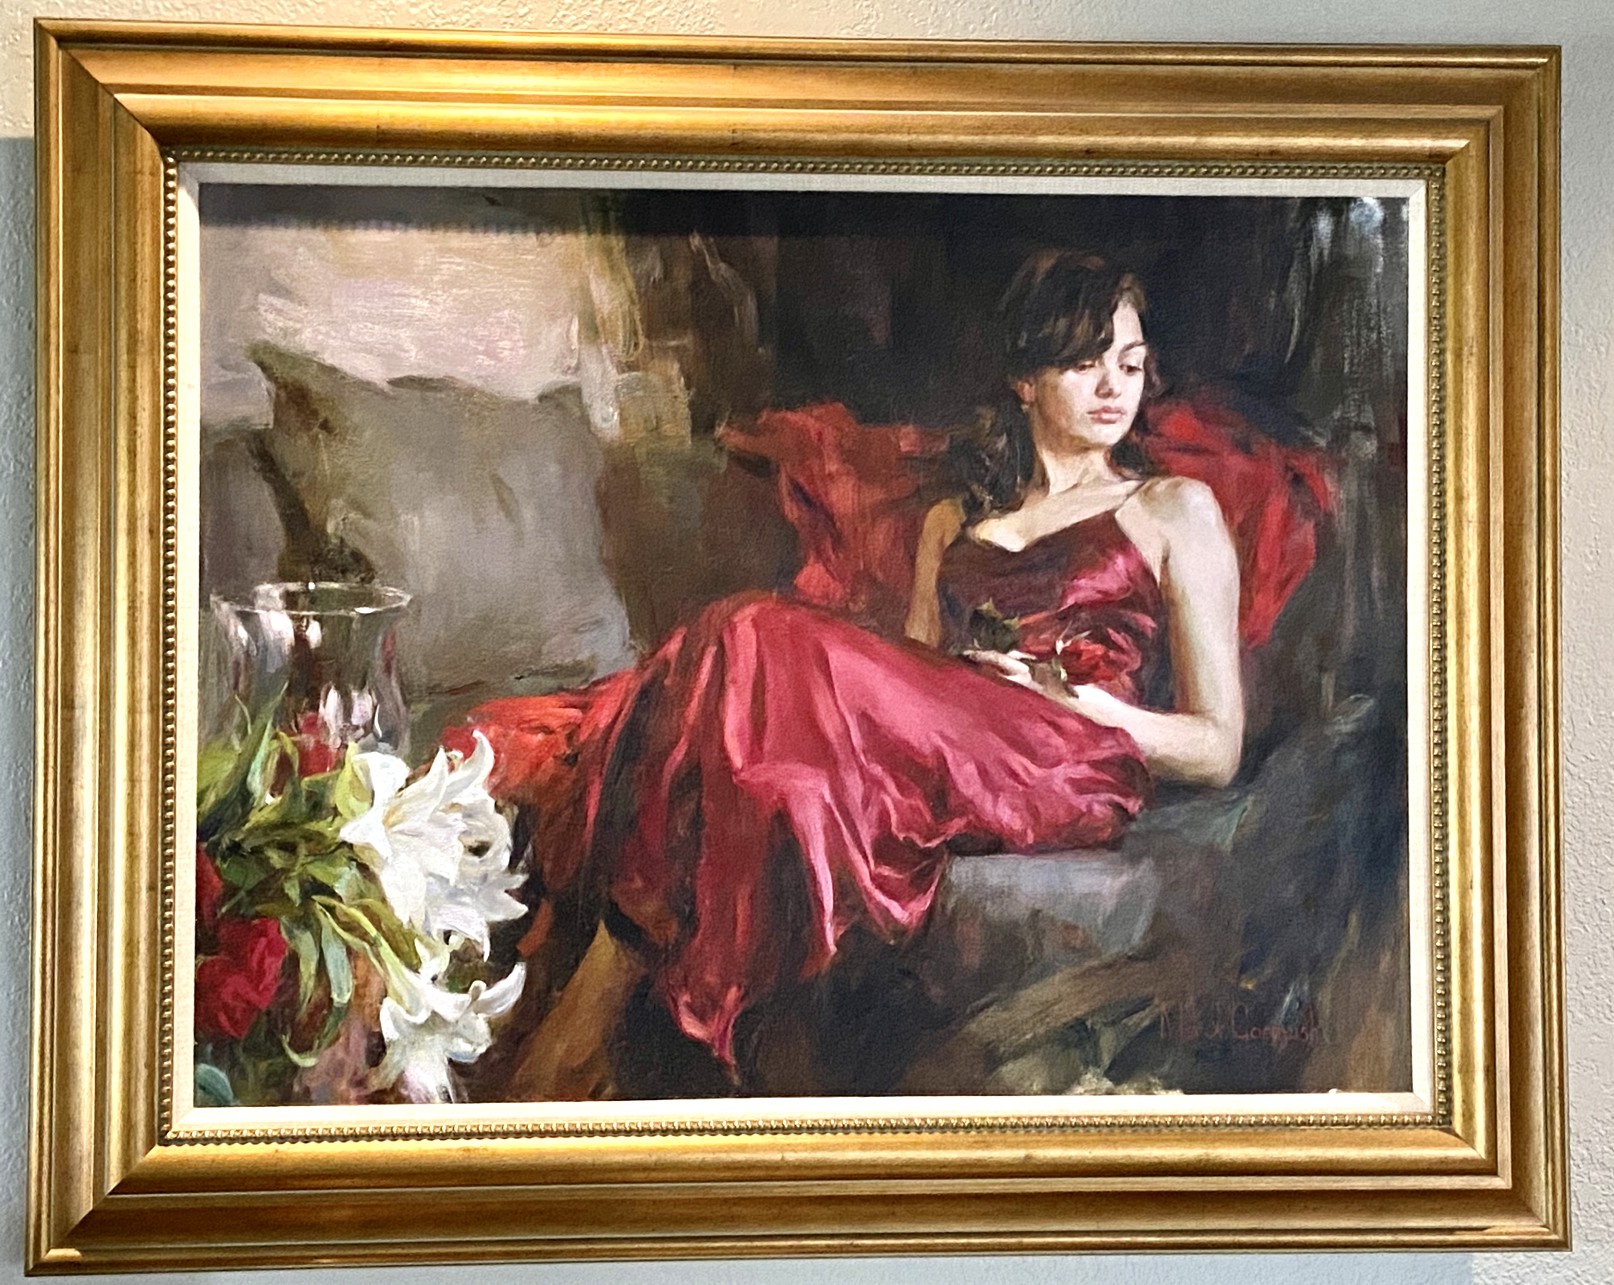 After the Opera - original painting -
by Michael and Inessa Garmash